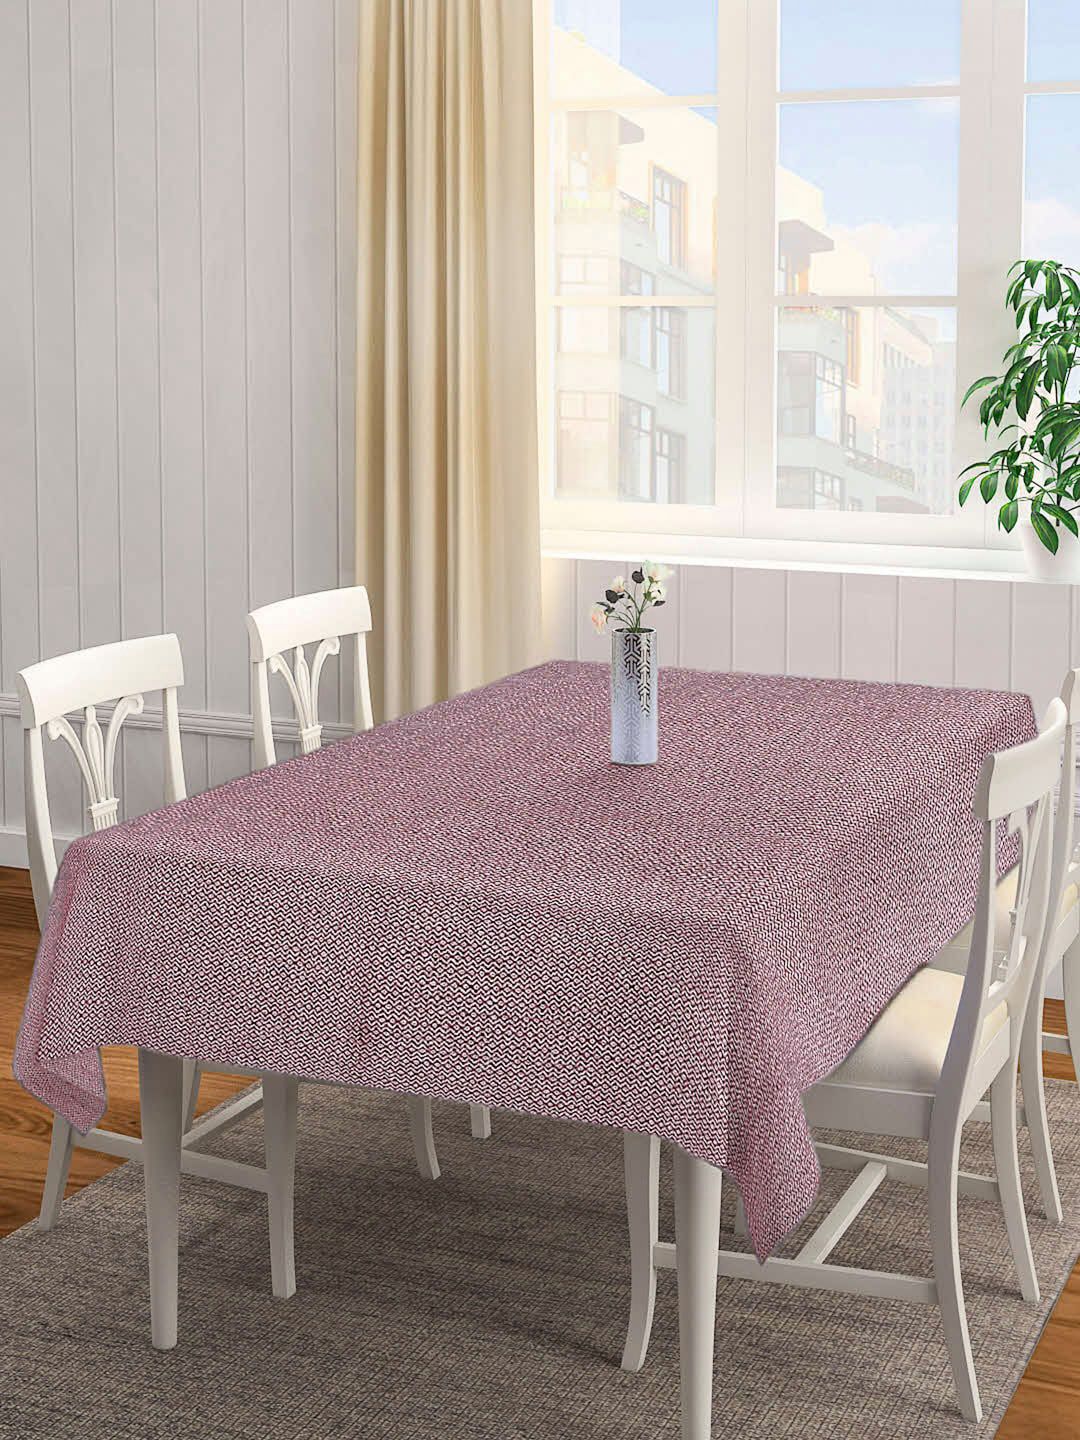 KLOTTHE Maroon & White Geometric Printed 6-Seater Rectangle Cotton Table Cover Price in India